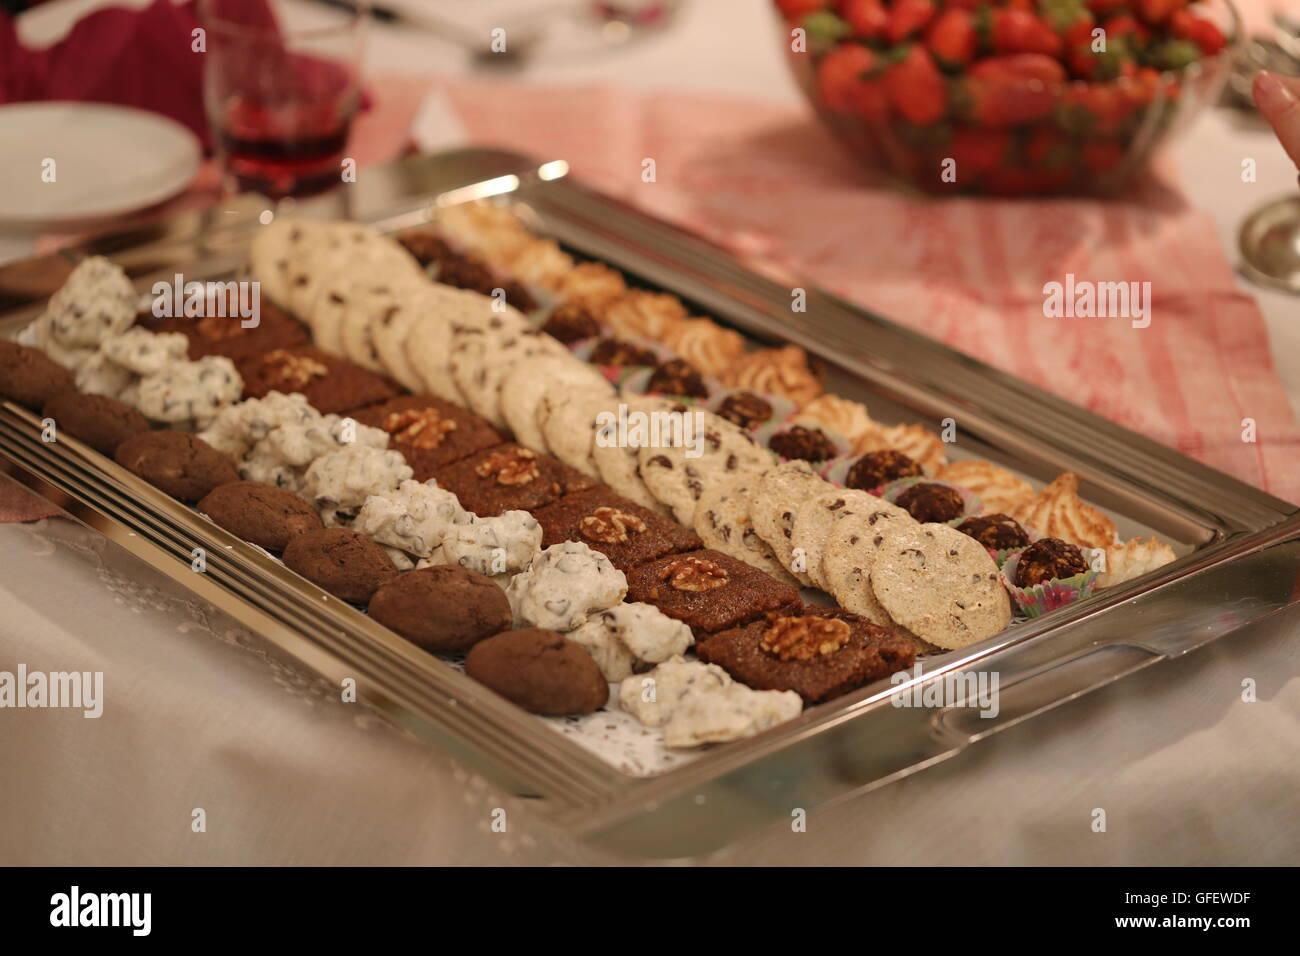 Cookies in a Silver Plate. Rectangle silver plate with variety of homemade cookies. Set of cookies in lines for the traditional Pesach festive meal. Stock Photo